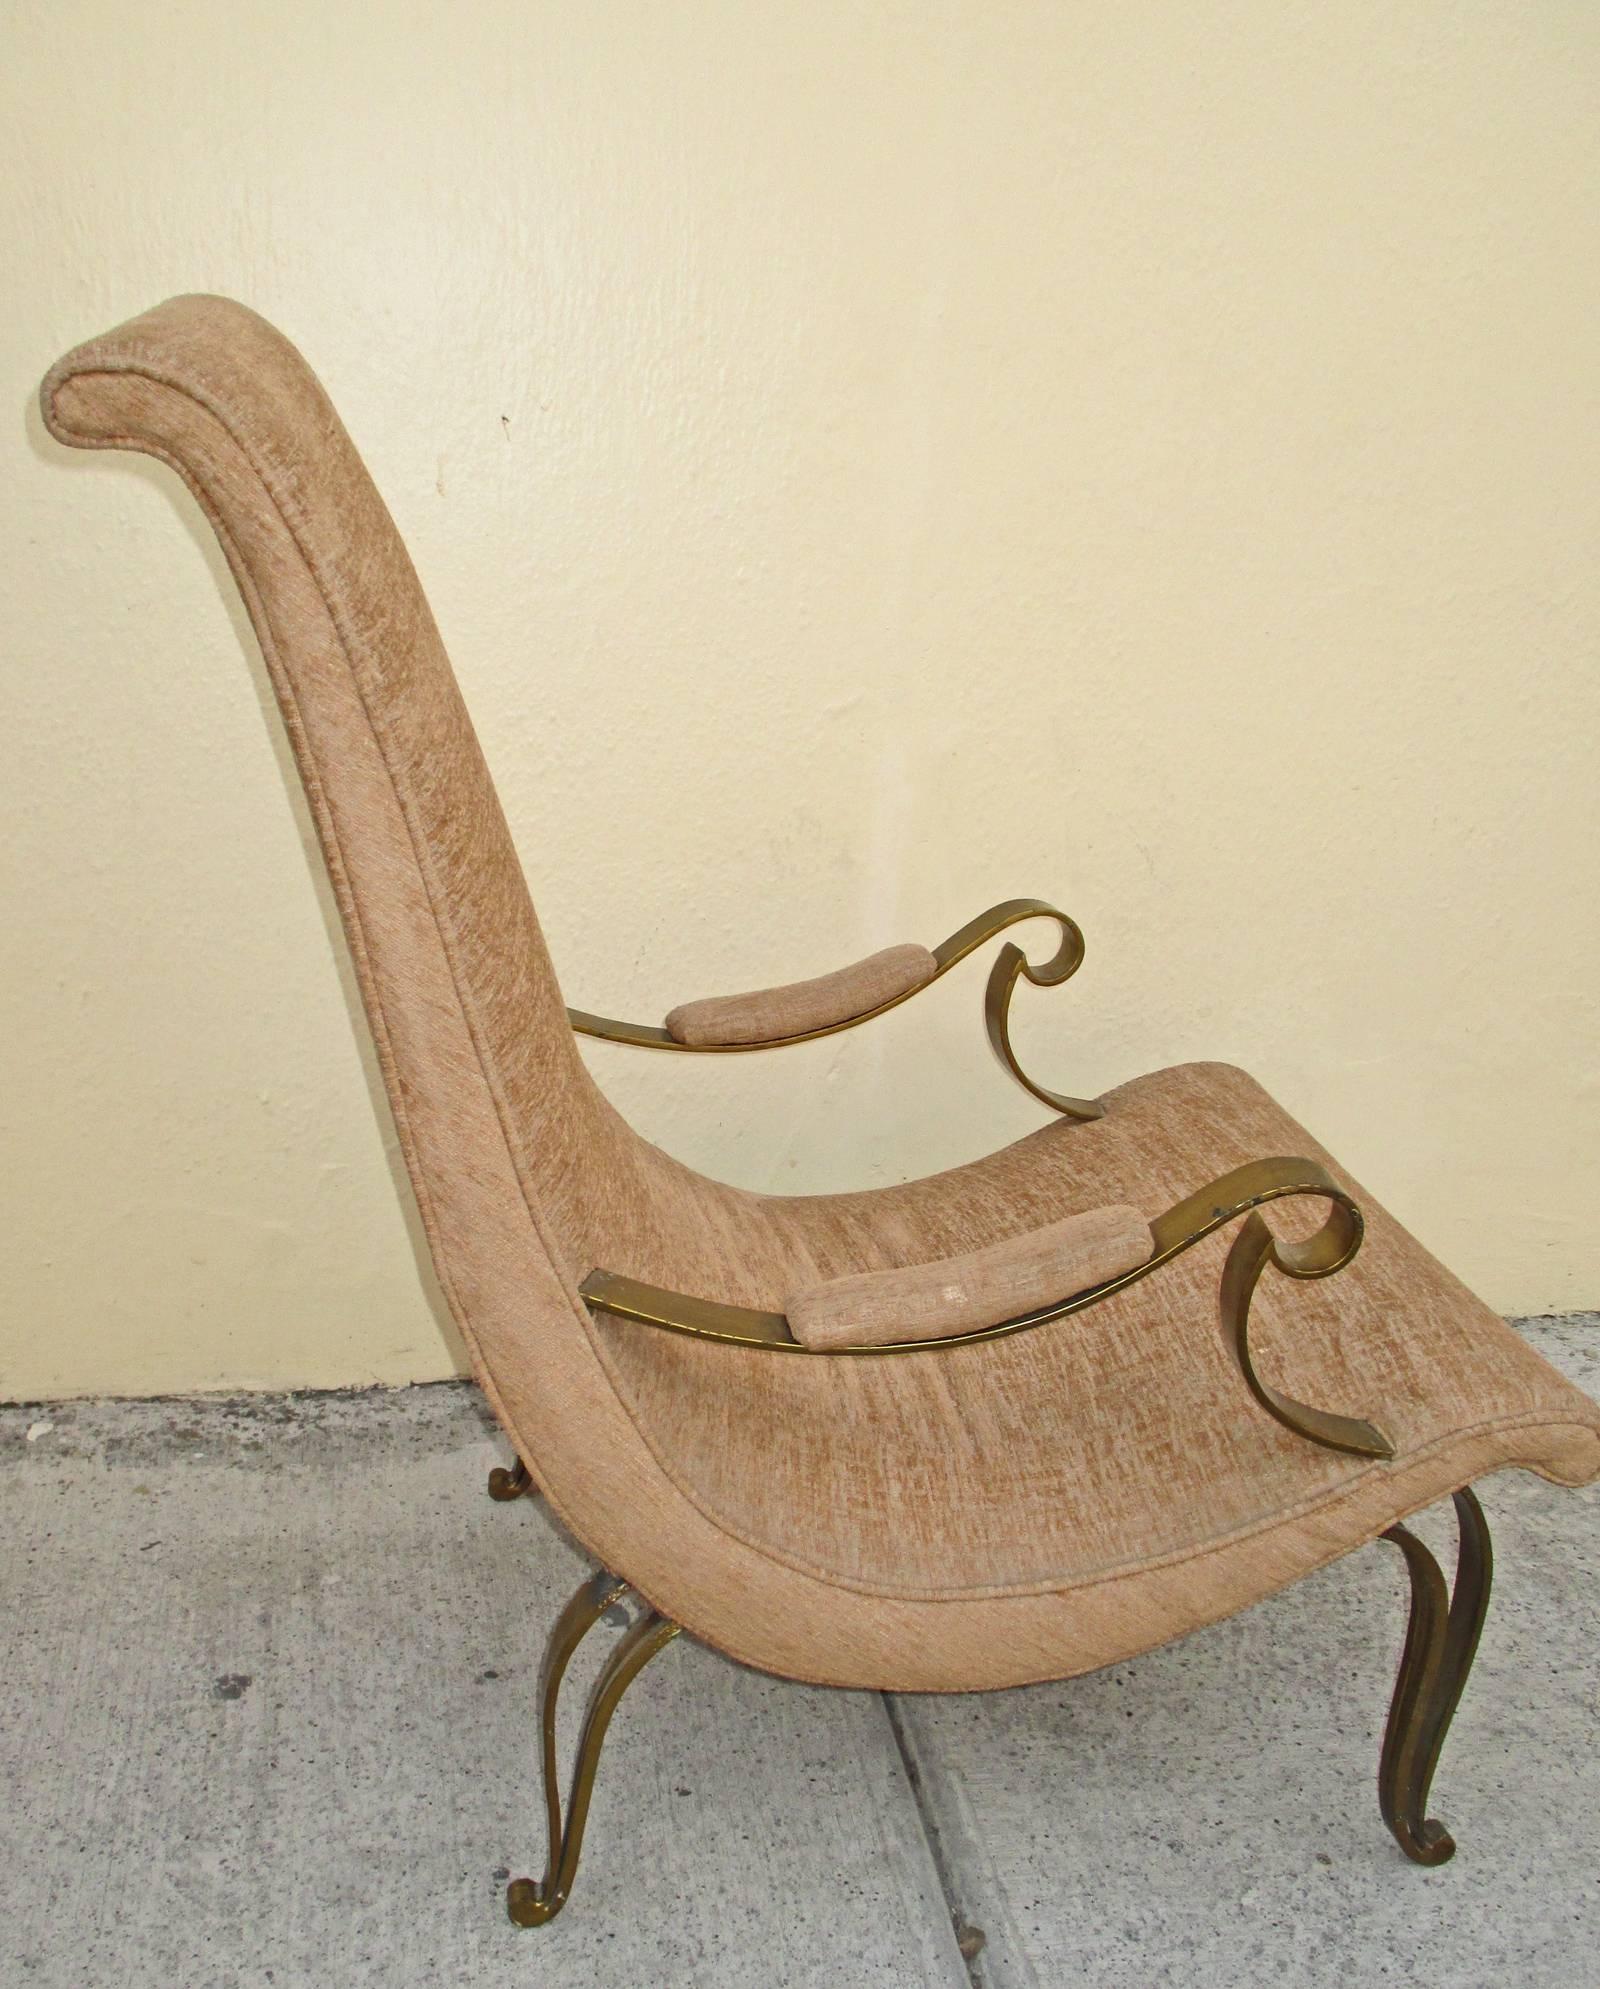 These two unique chairs mimic the traditional Mexican 